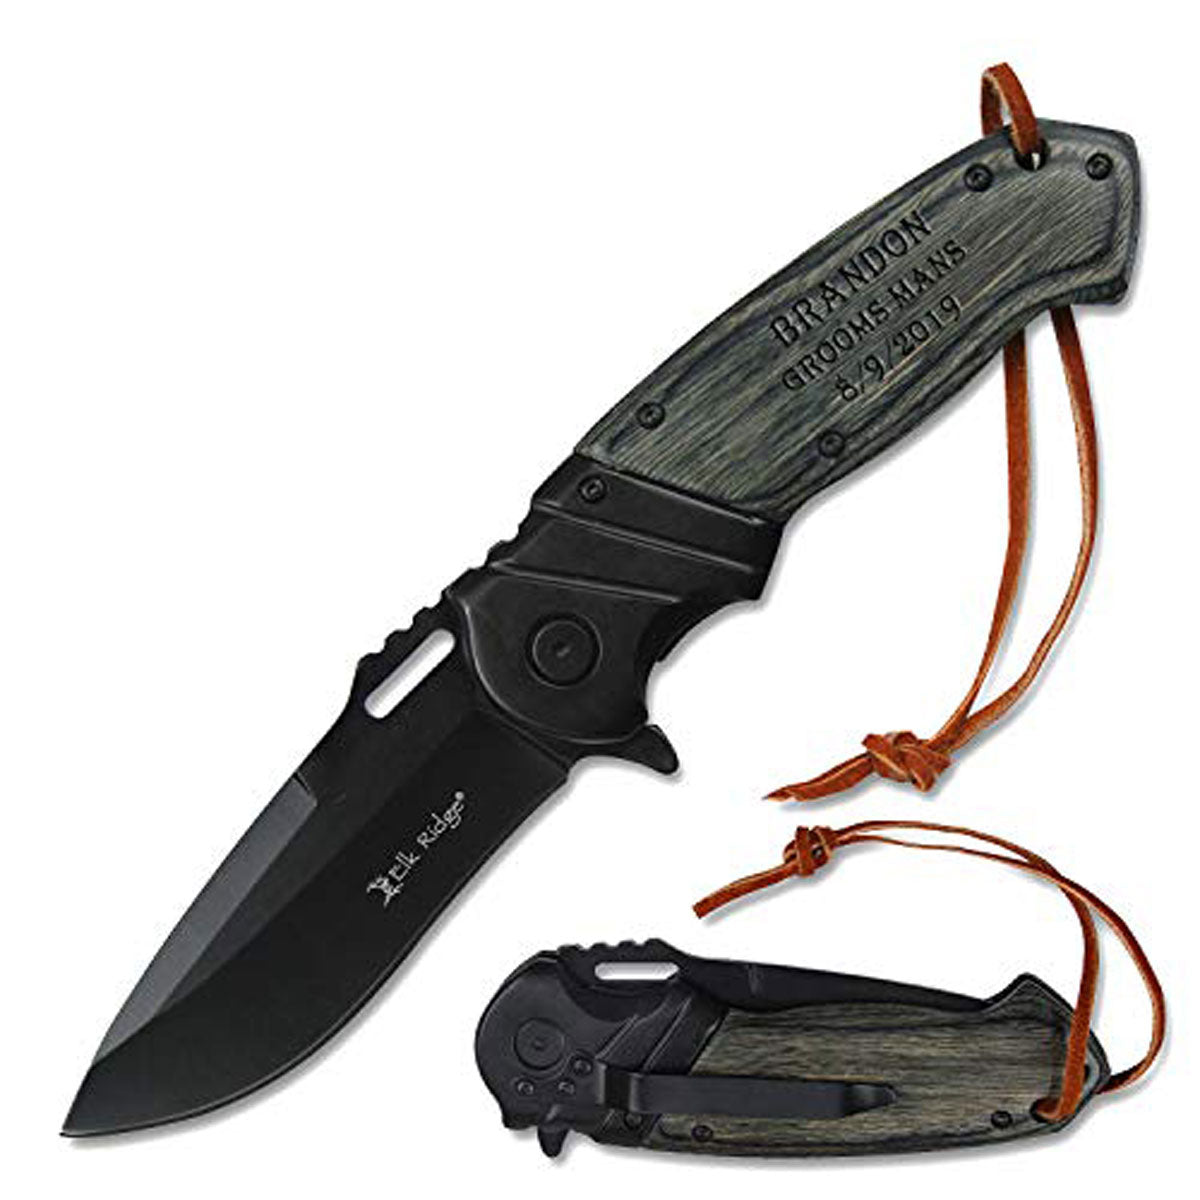 GIFTS INFINITY Personalized Laser Engraved 4.75" Folding Knife, Black wood Handle with Pocket Clip, Best Gifts for Dad